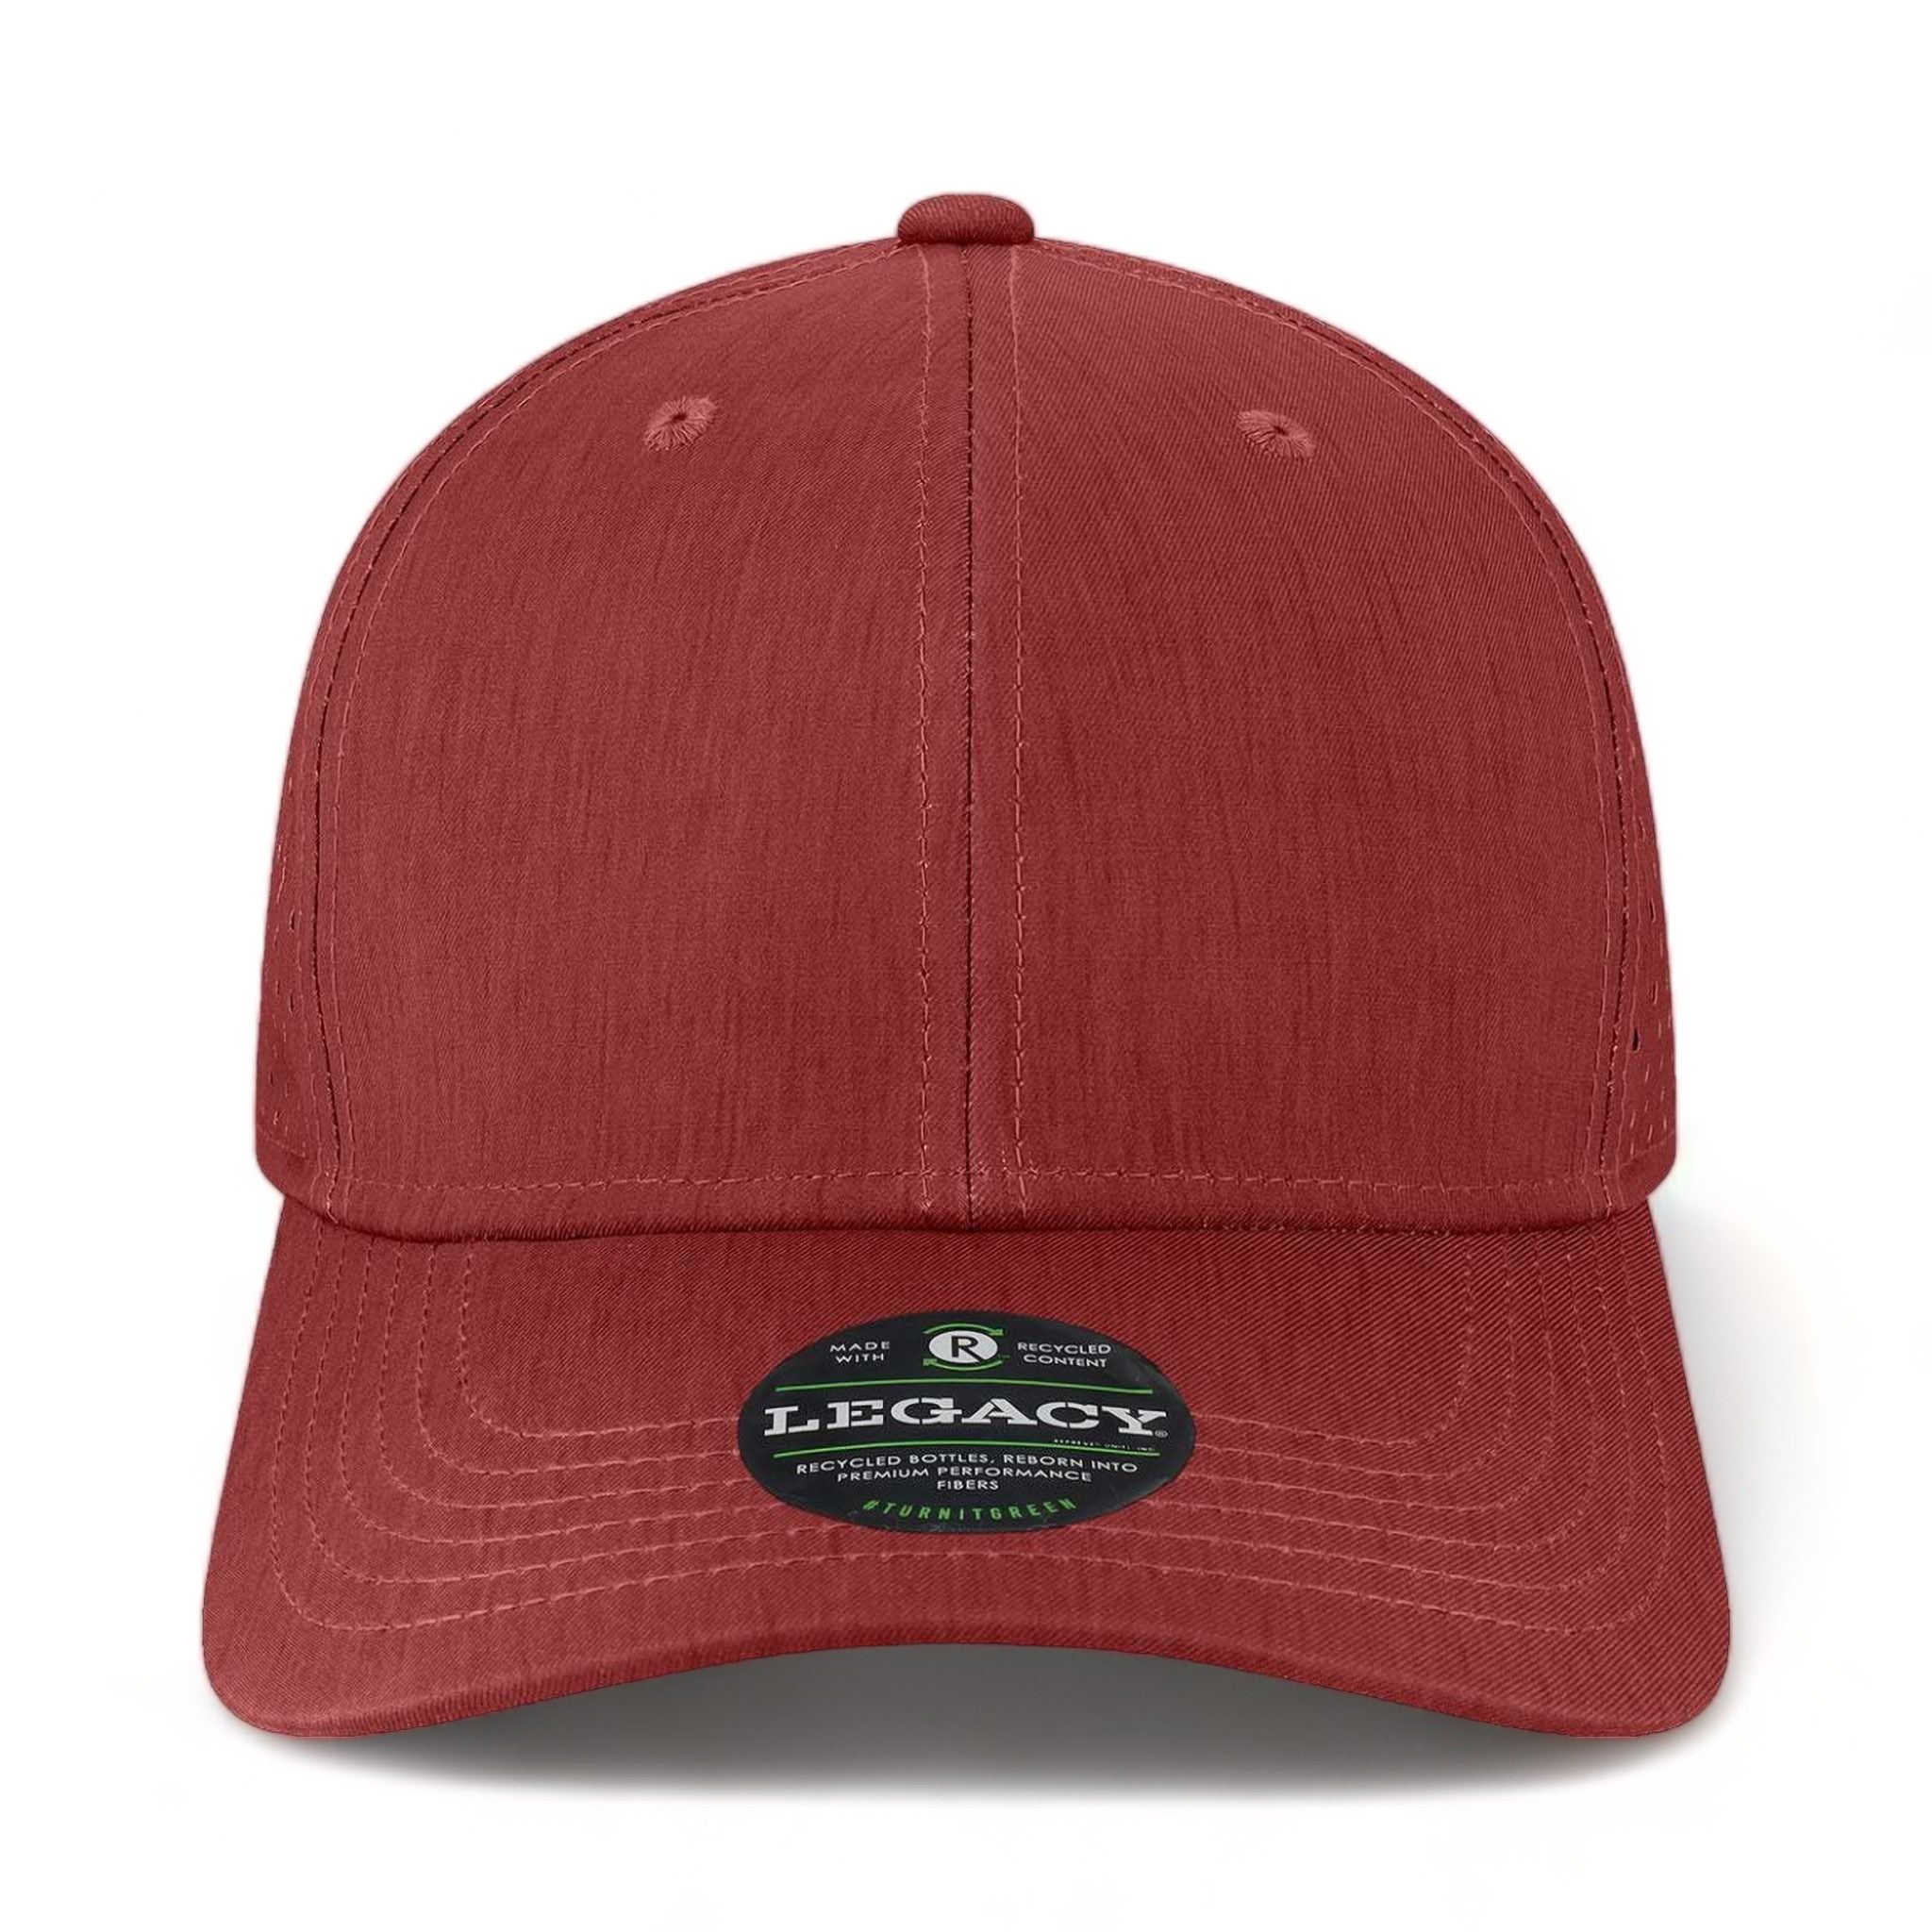 Front view of LEGACY REMPA custom hat in eco maroon